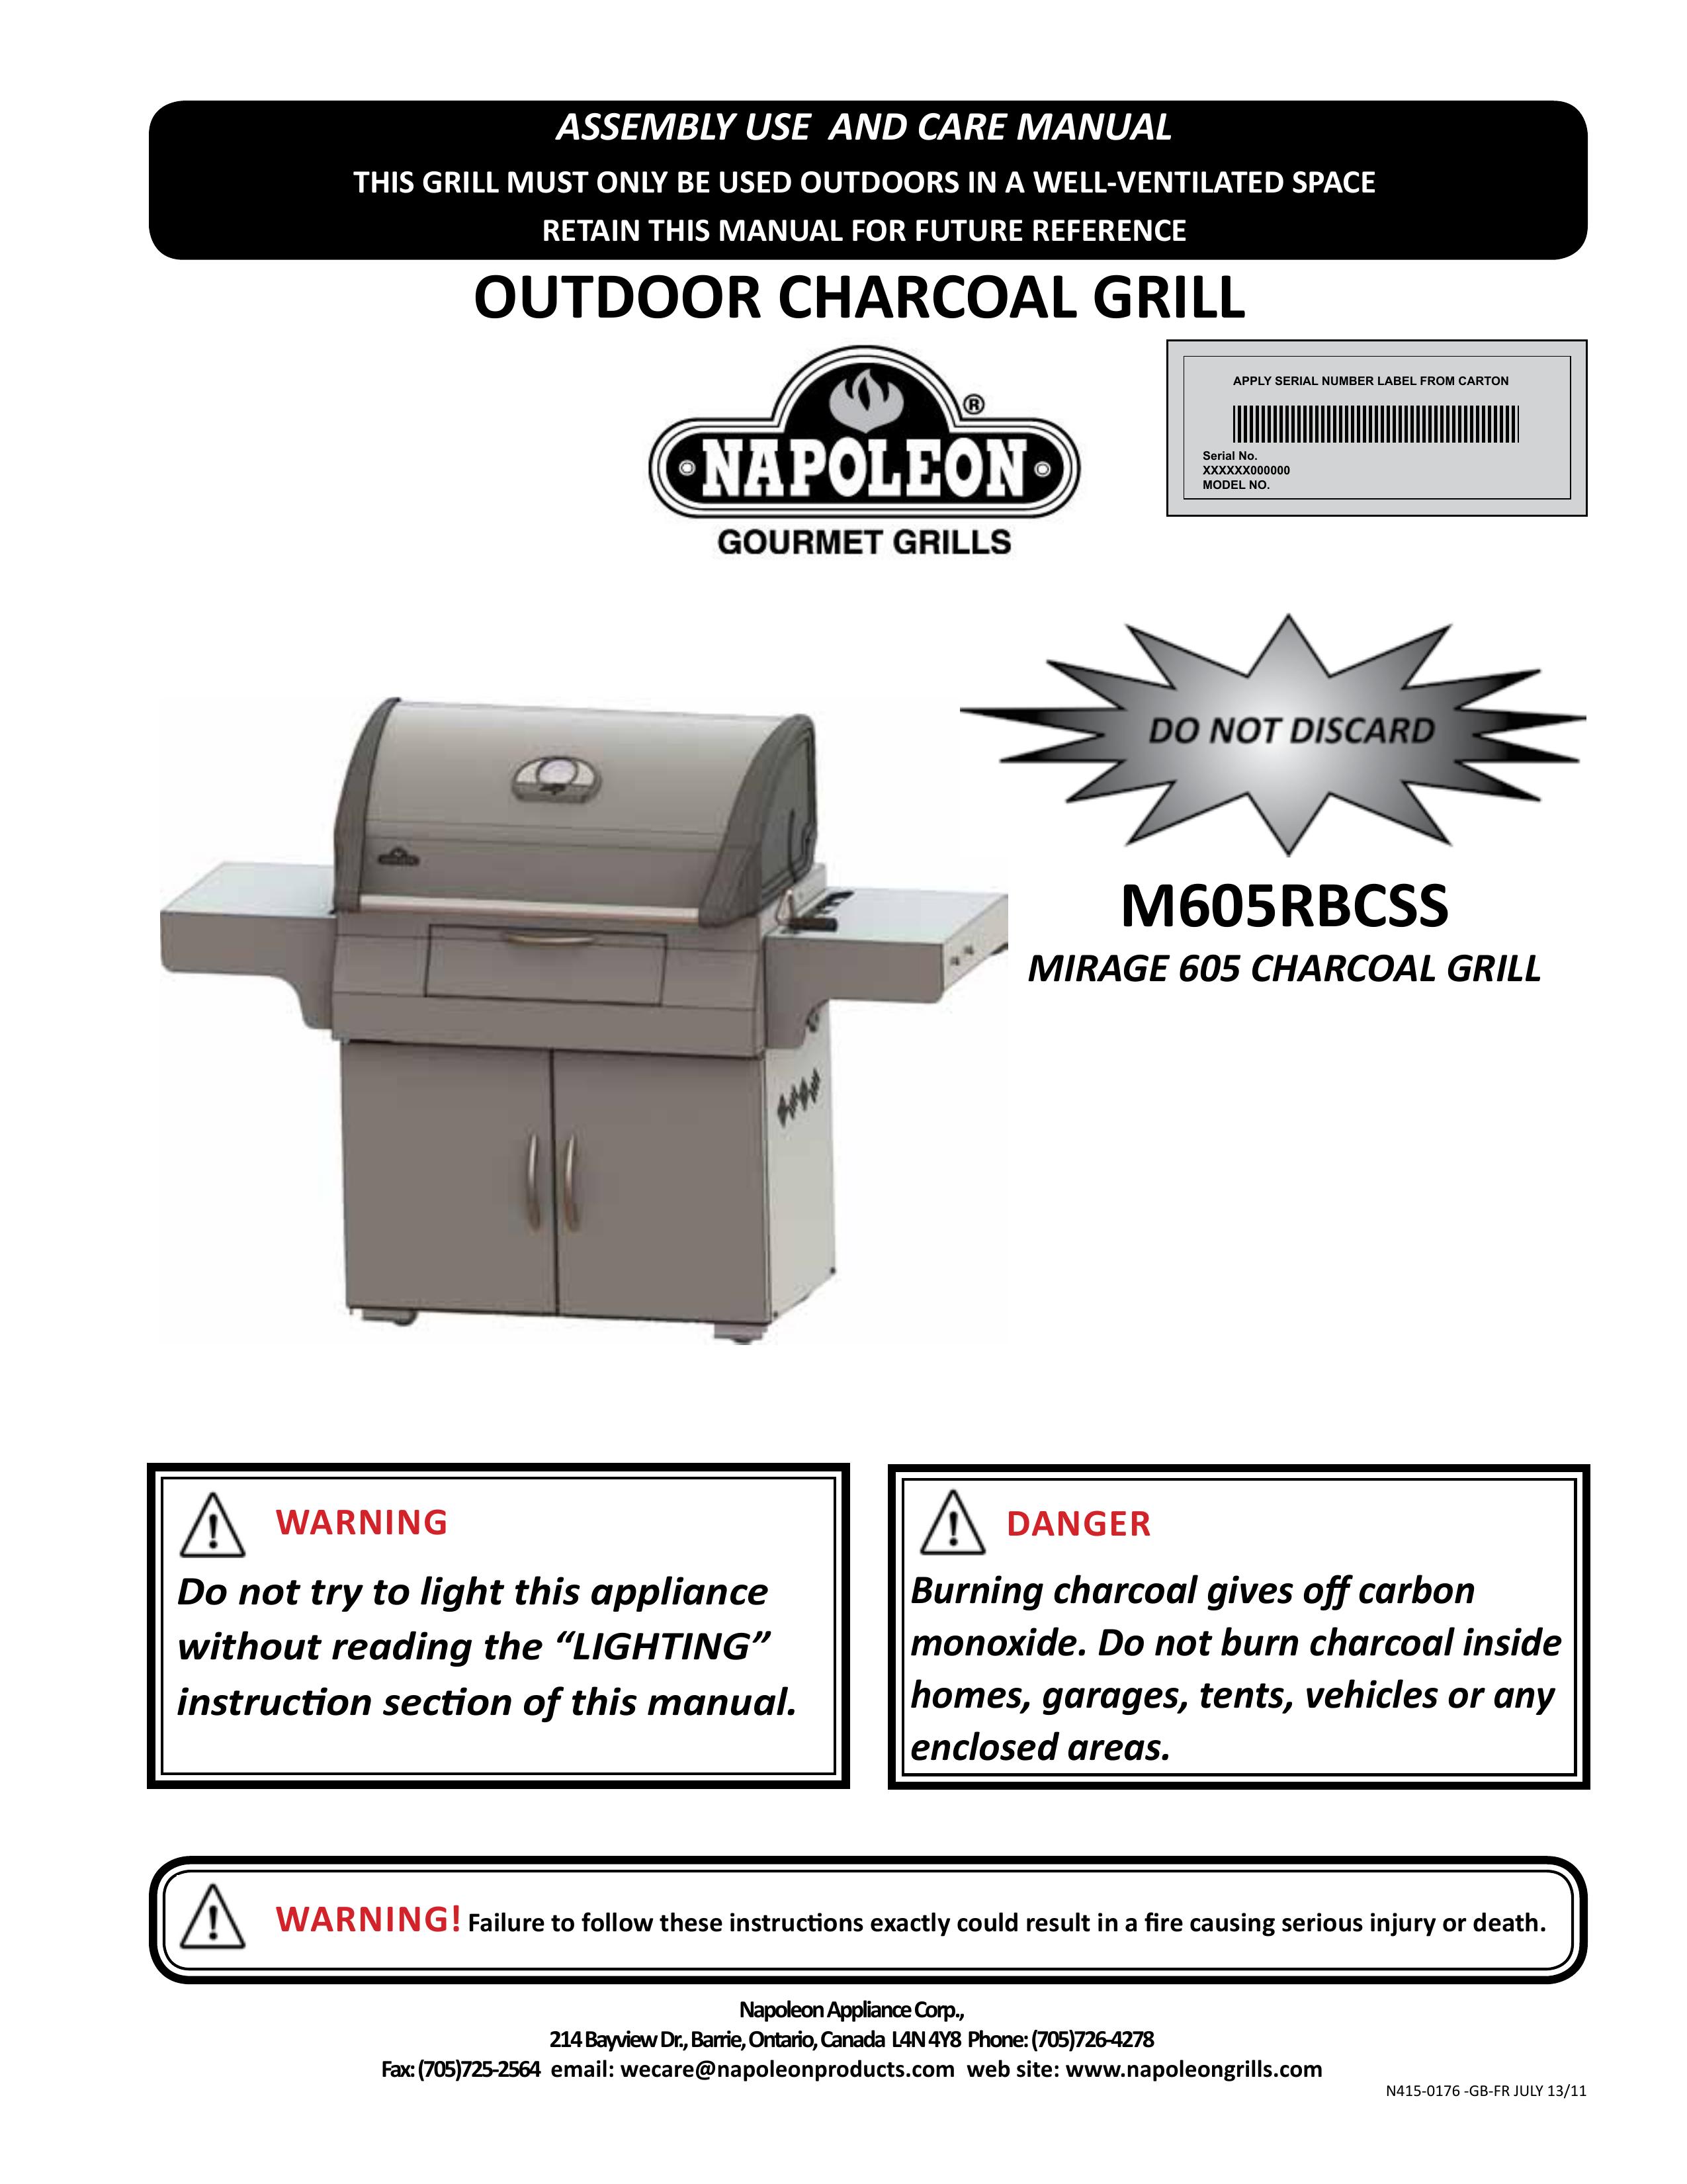 Napoleon Grills M605RBCSS Charcoal Grill User Manual